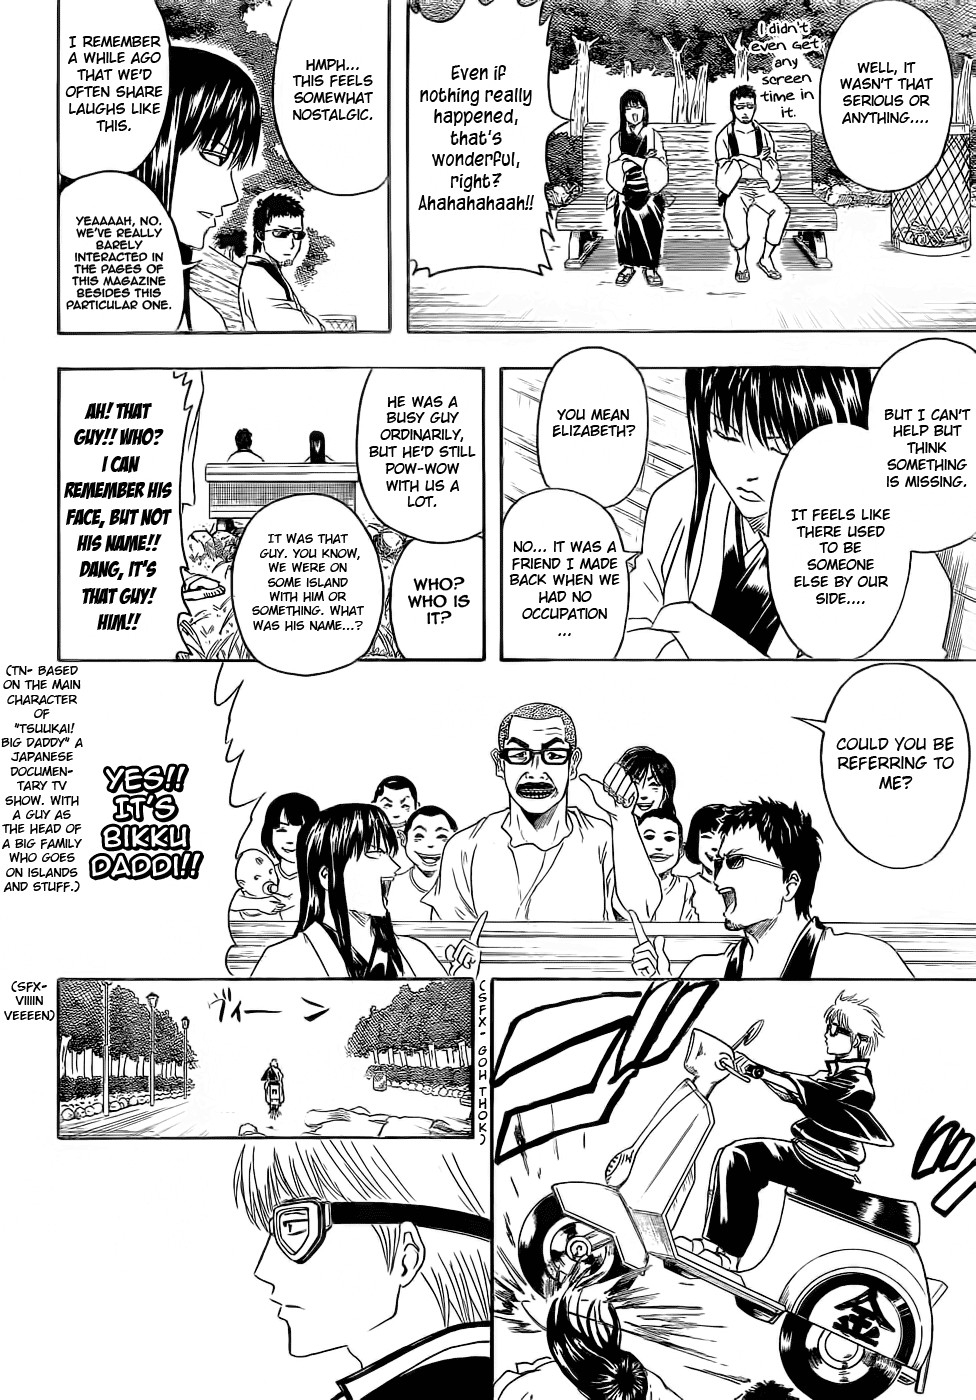 Gintama chapter 375 page 5